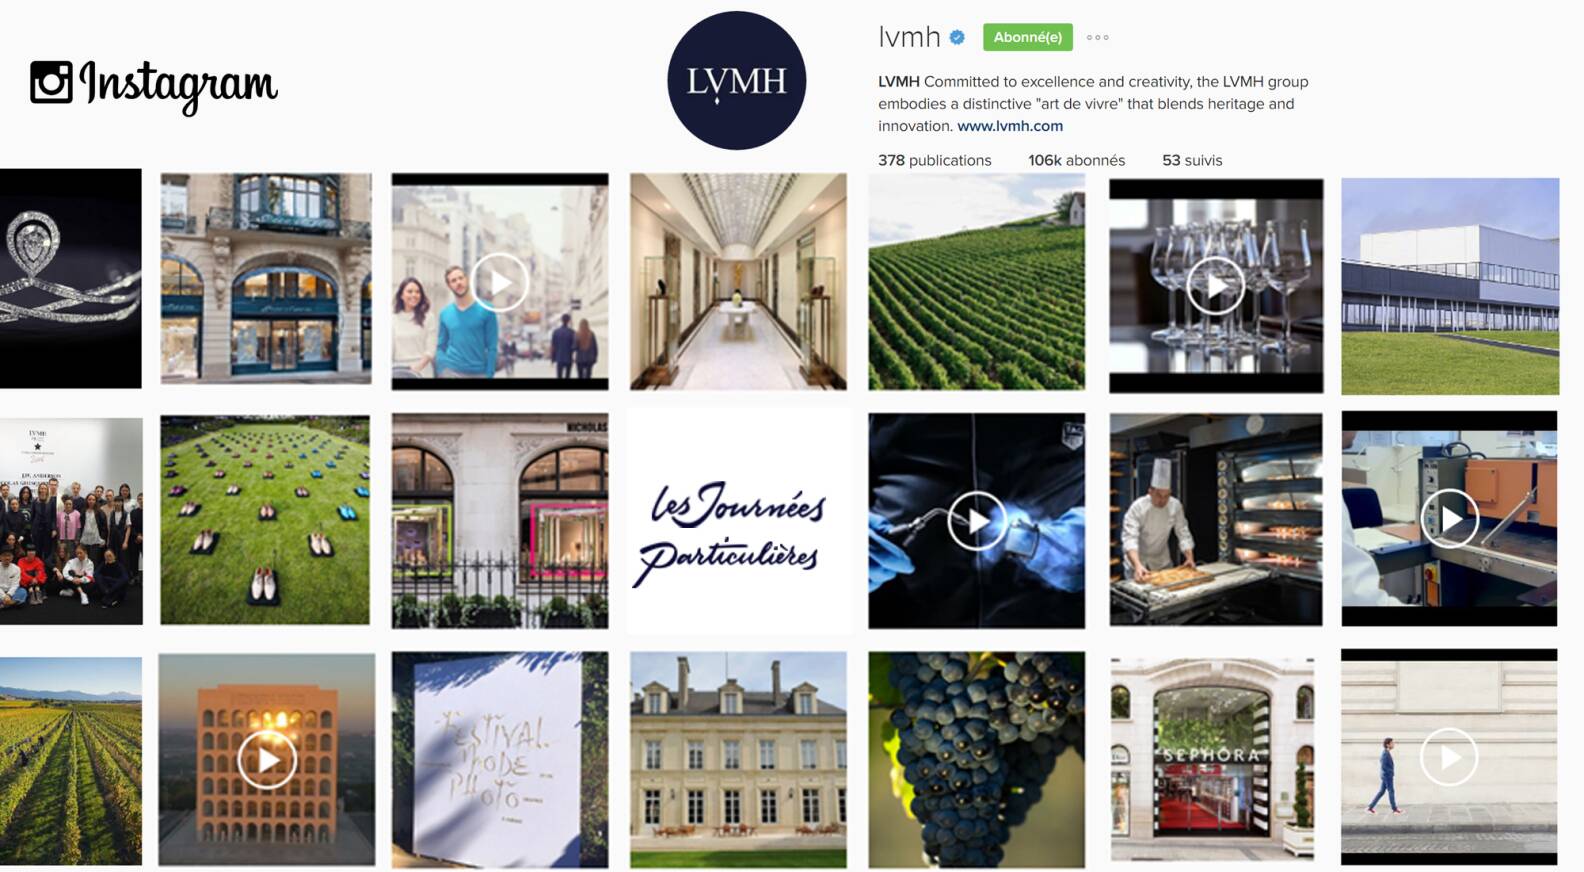 Les Journées Particulières 2016: sharing the experience on social networks  - LVMH